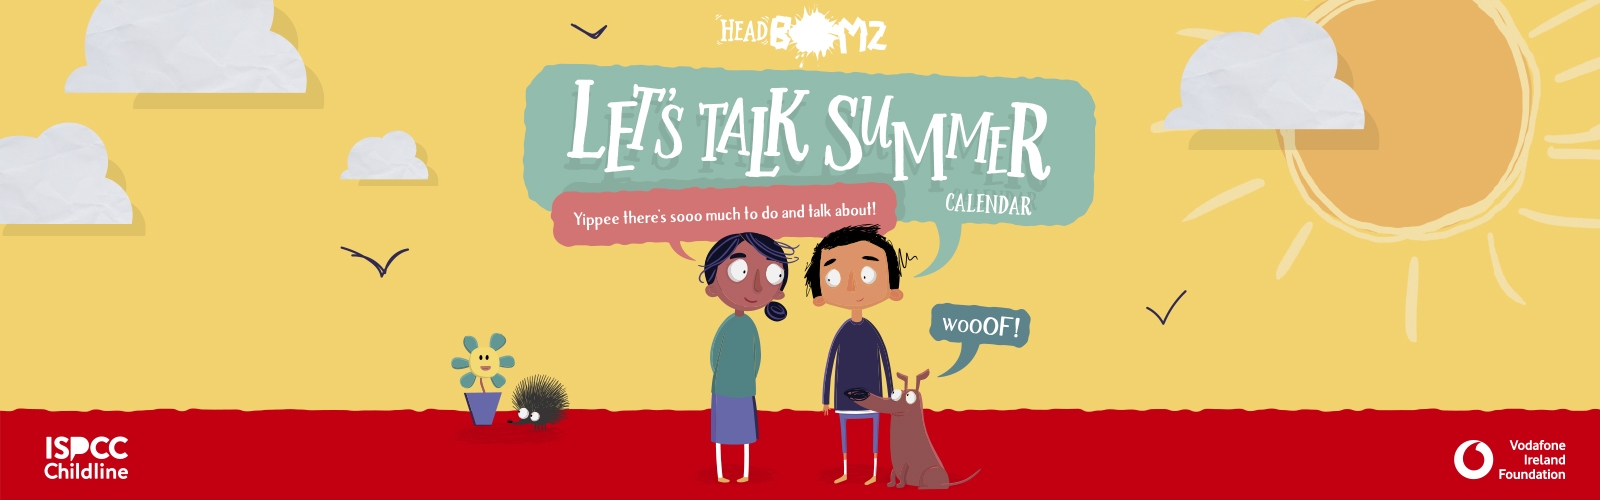 Headbombz illustration of a girls and boy with the words "Let's talk summer calendar" in a speech bubble above their head.